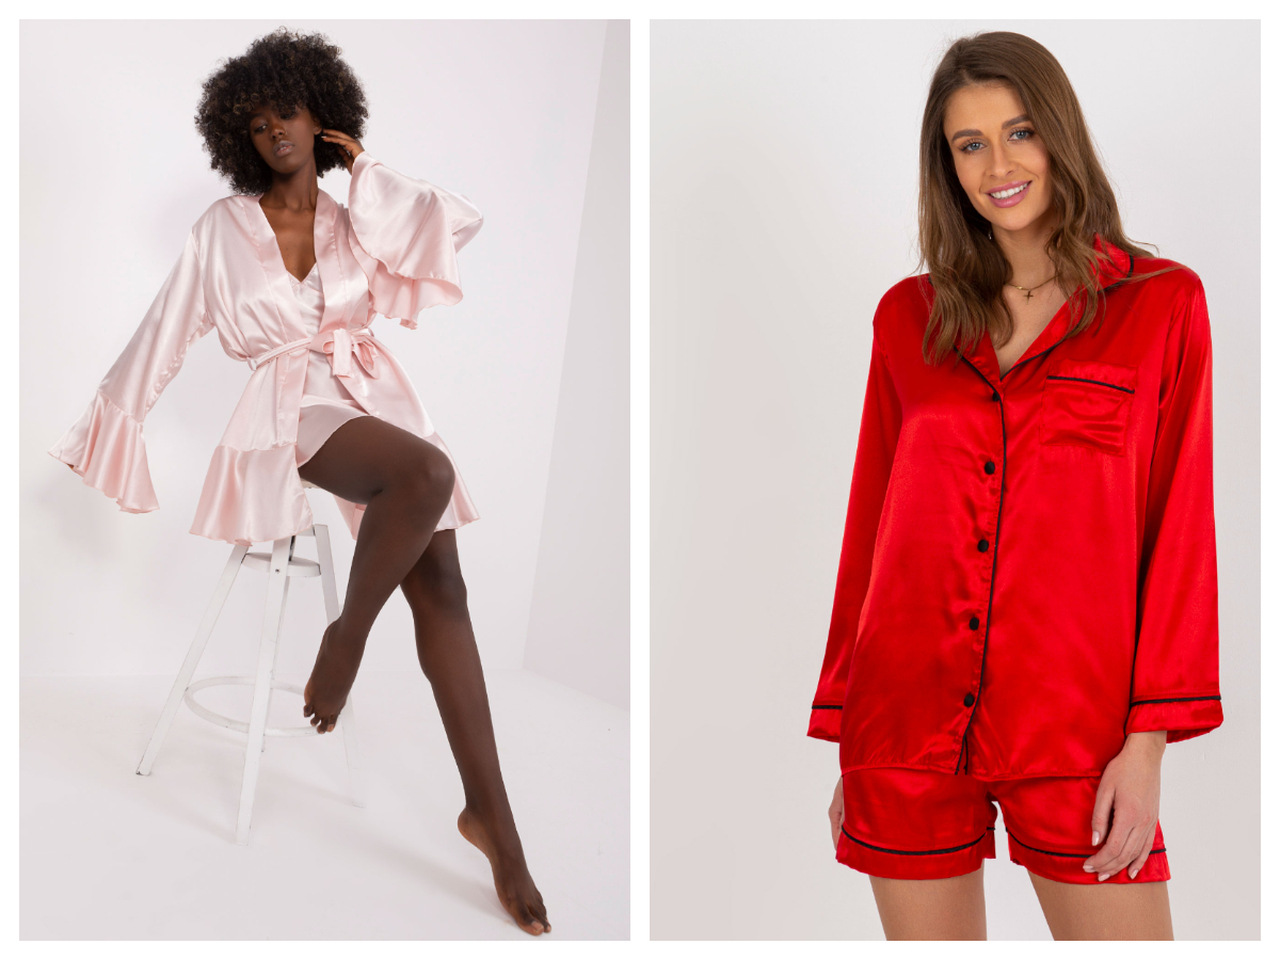 Women’s satin pajamas – check out interesting models online